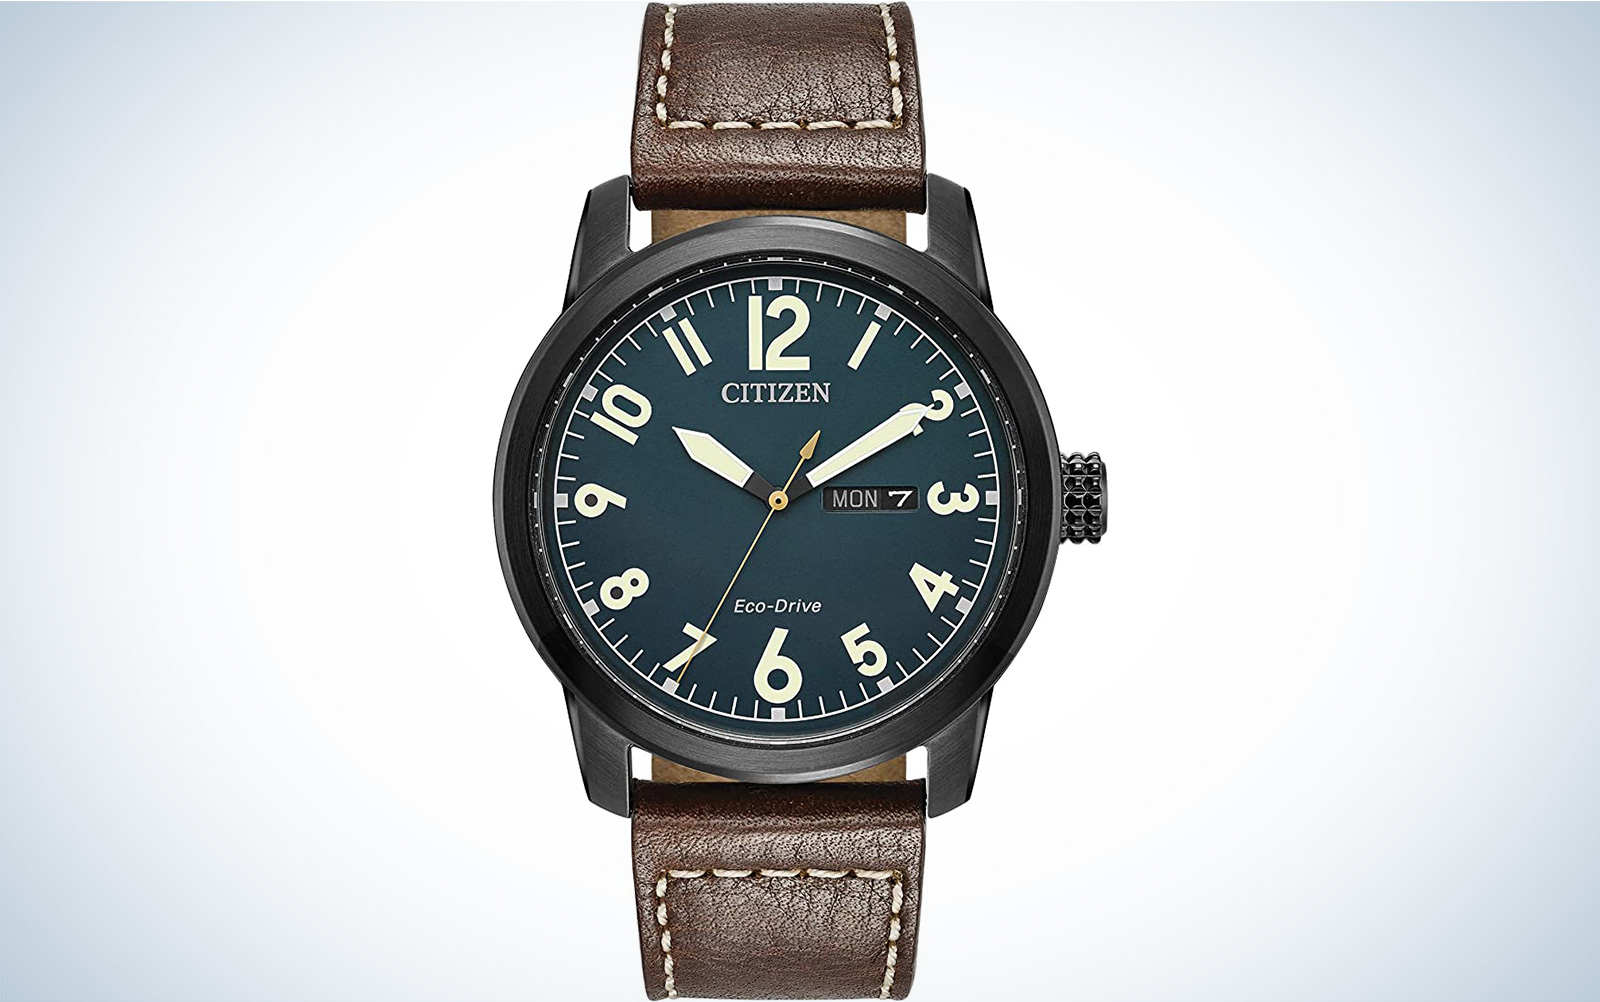 Citizen Men's Eco-Drive Weekender Garrison Field Watch in Black IP Stainless Steel with Brown Leather strap